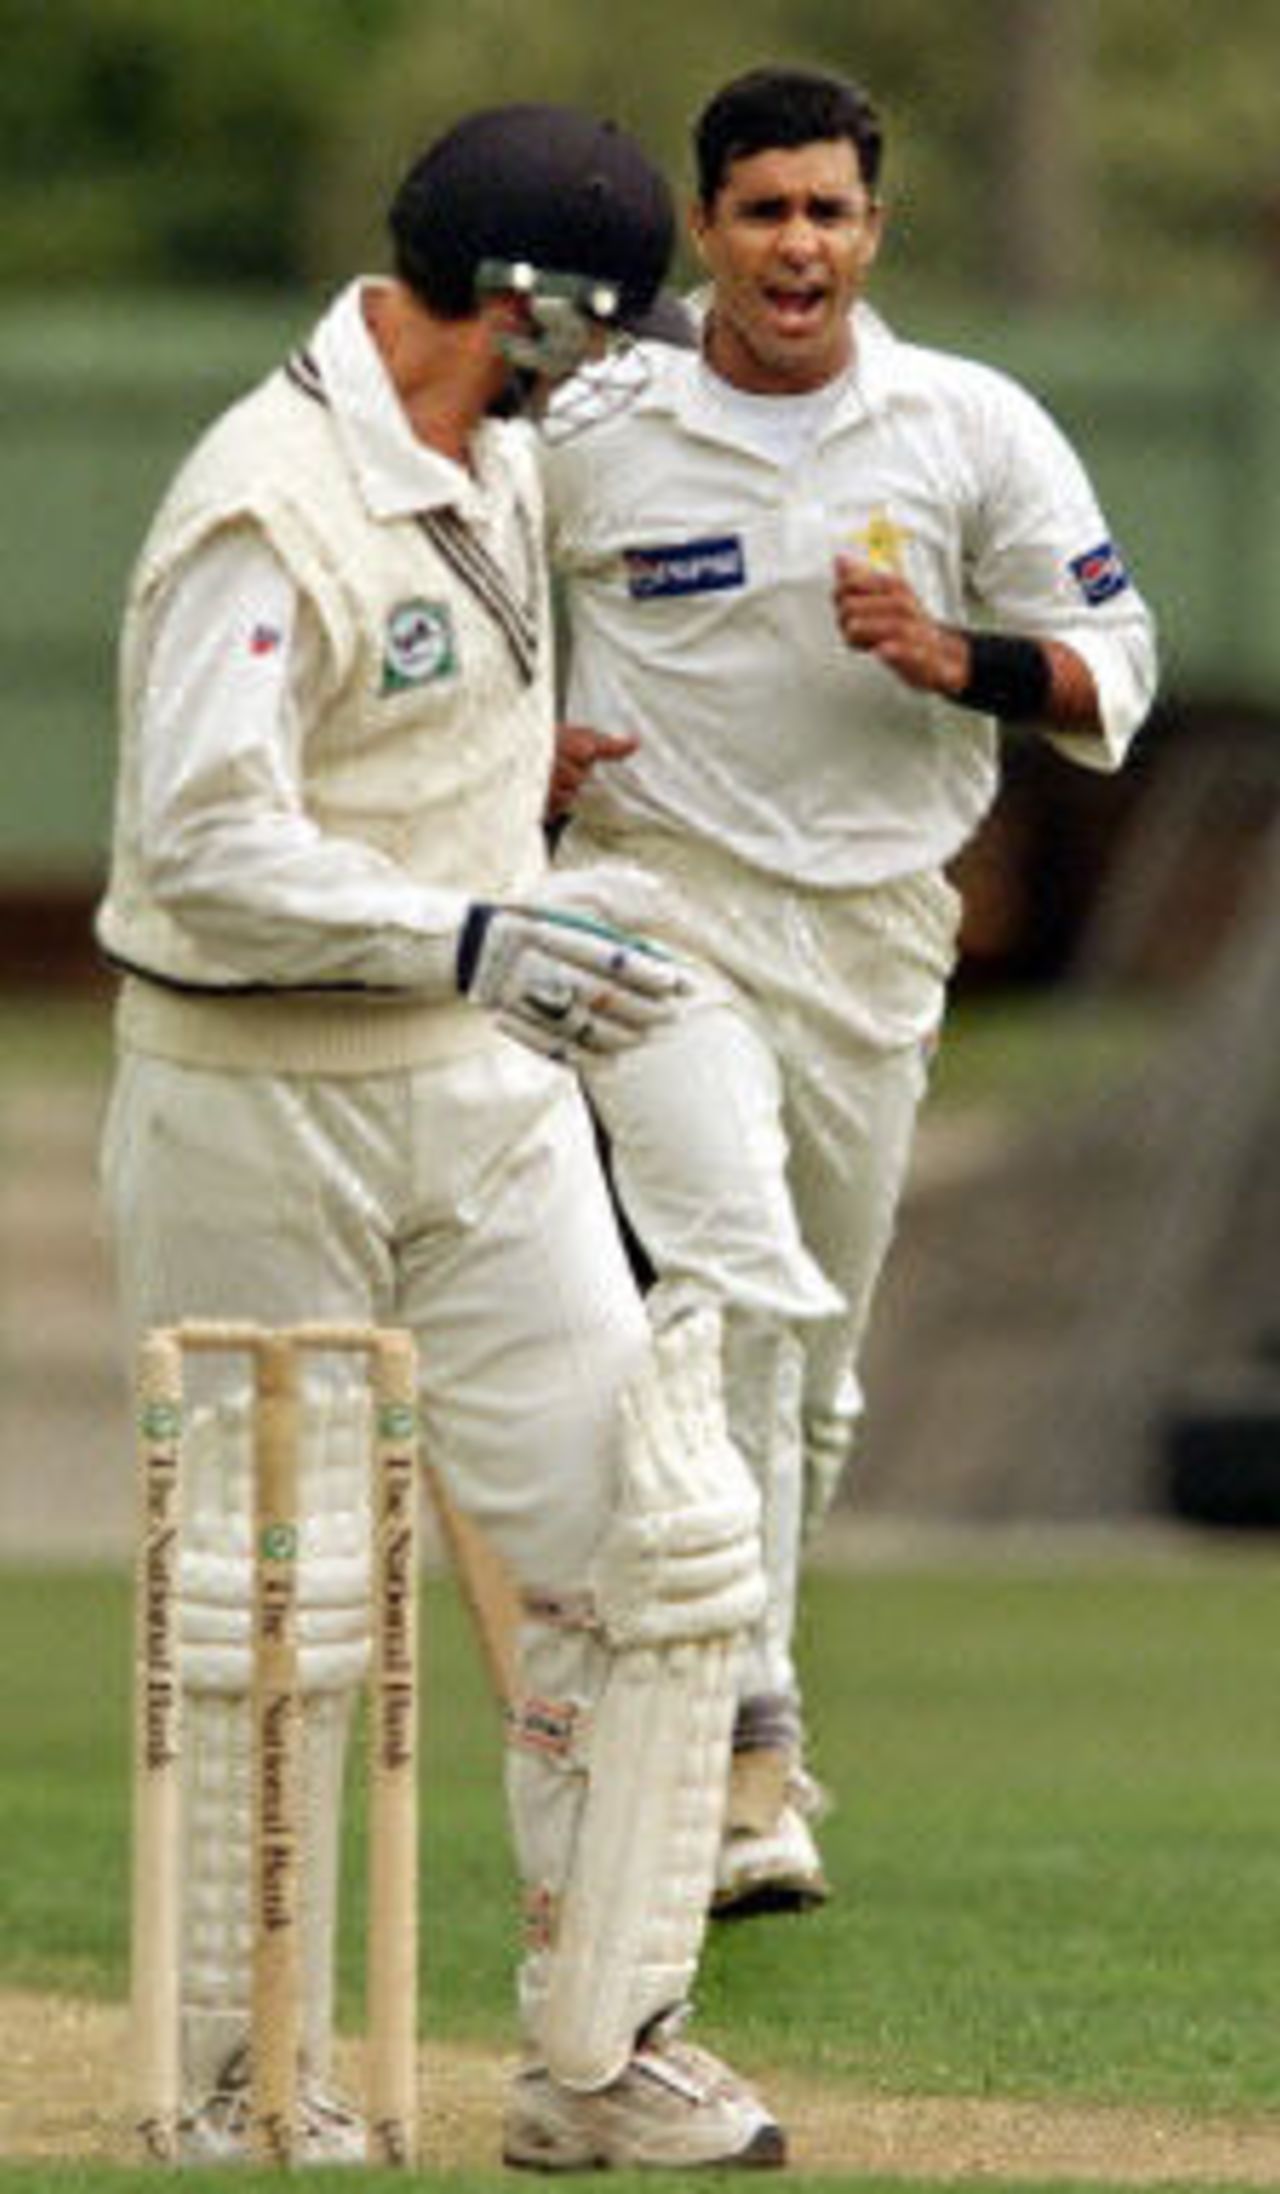 Waqar Younis celebrates the wicket of Nathan Astle, day 1, 2nd Test at Christchurch, 15-19 March 2001.